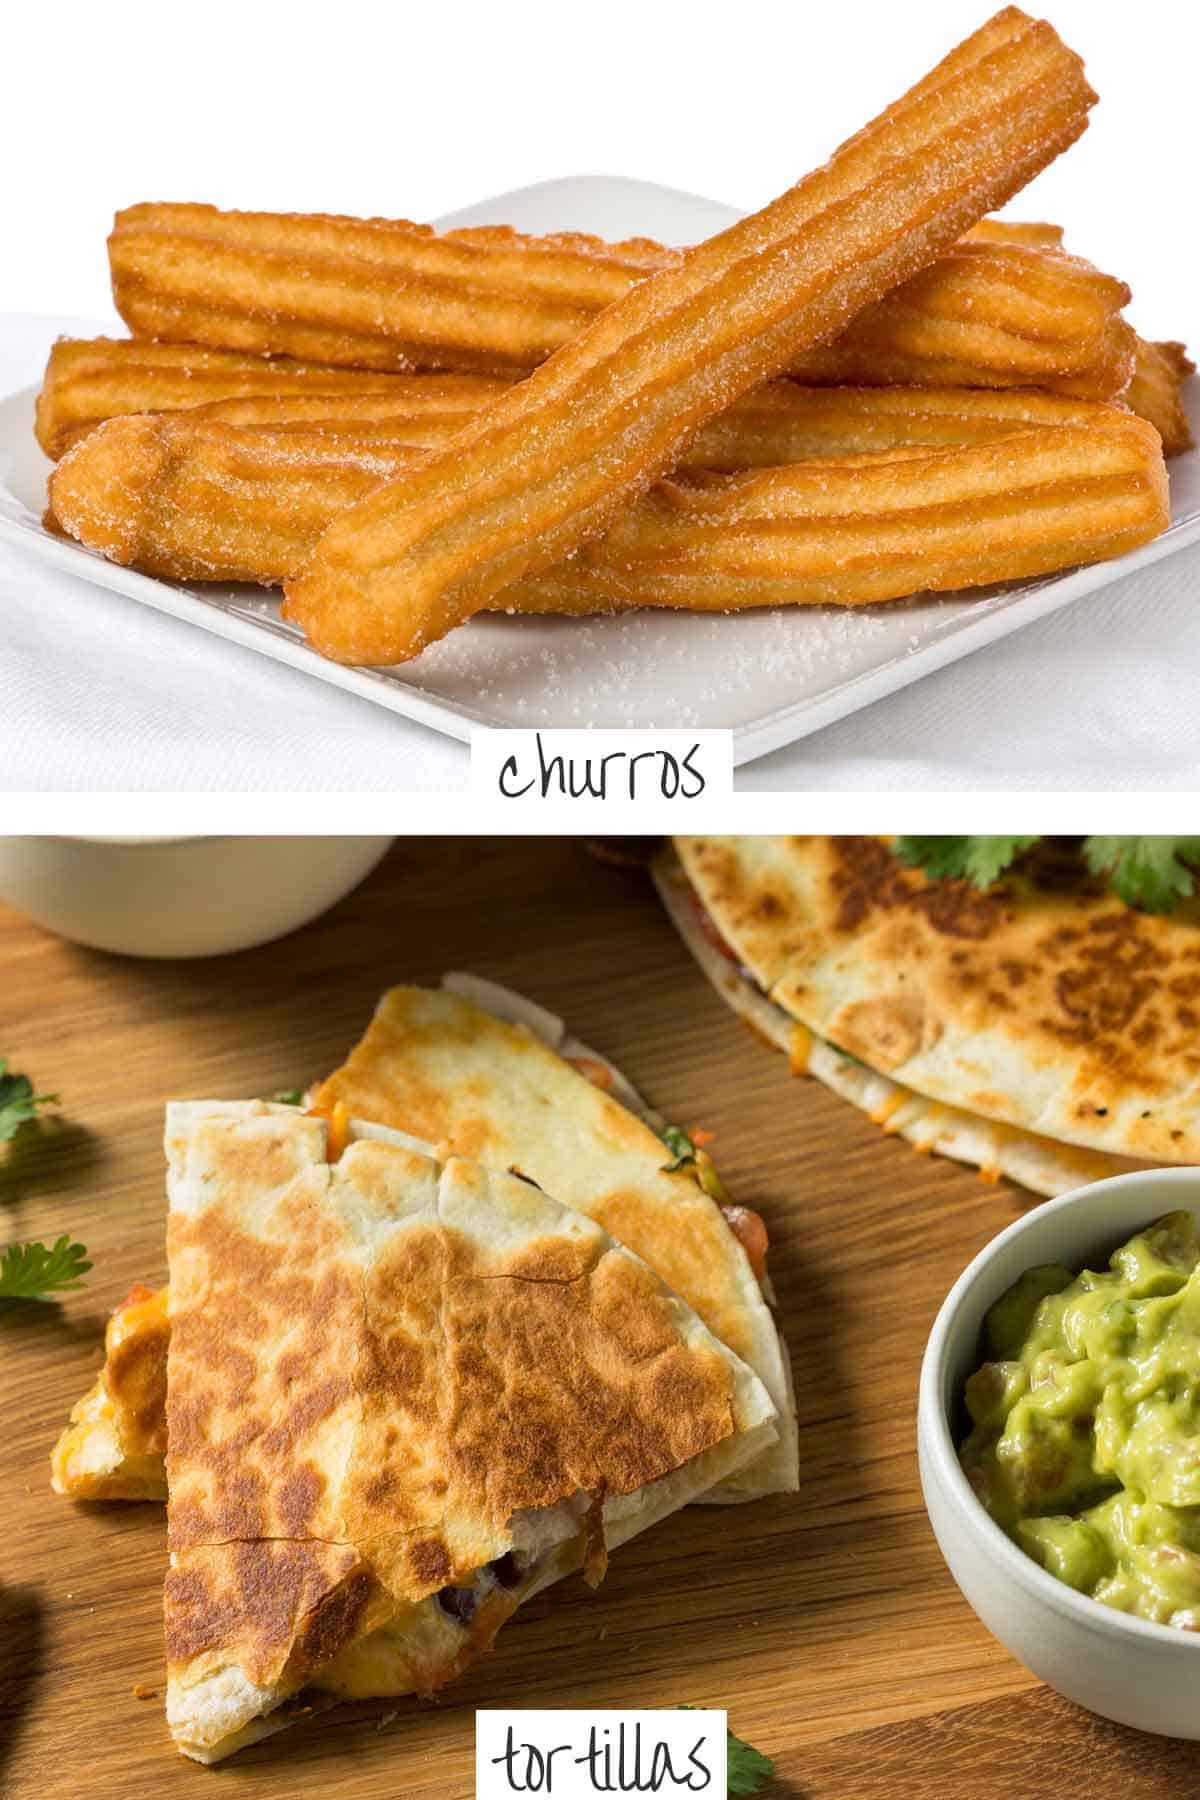 Plate of churros and tortillas made into quesadillas.